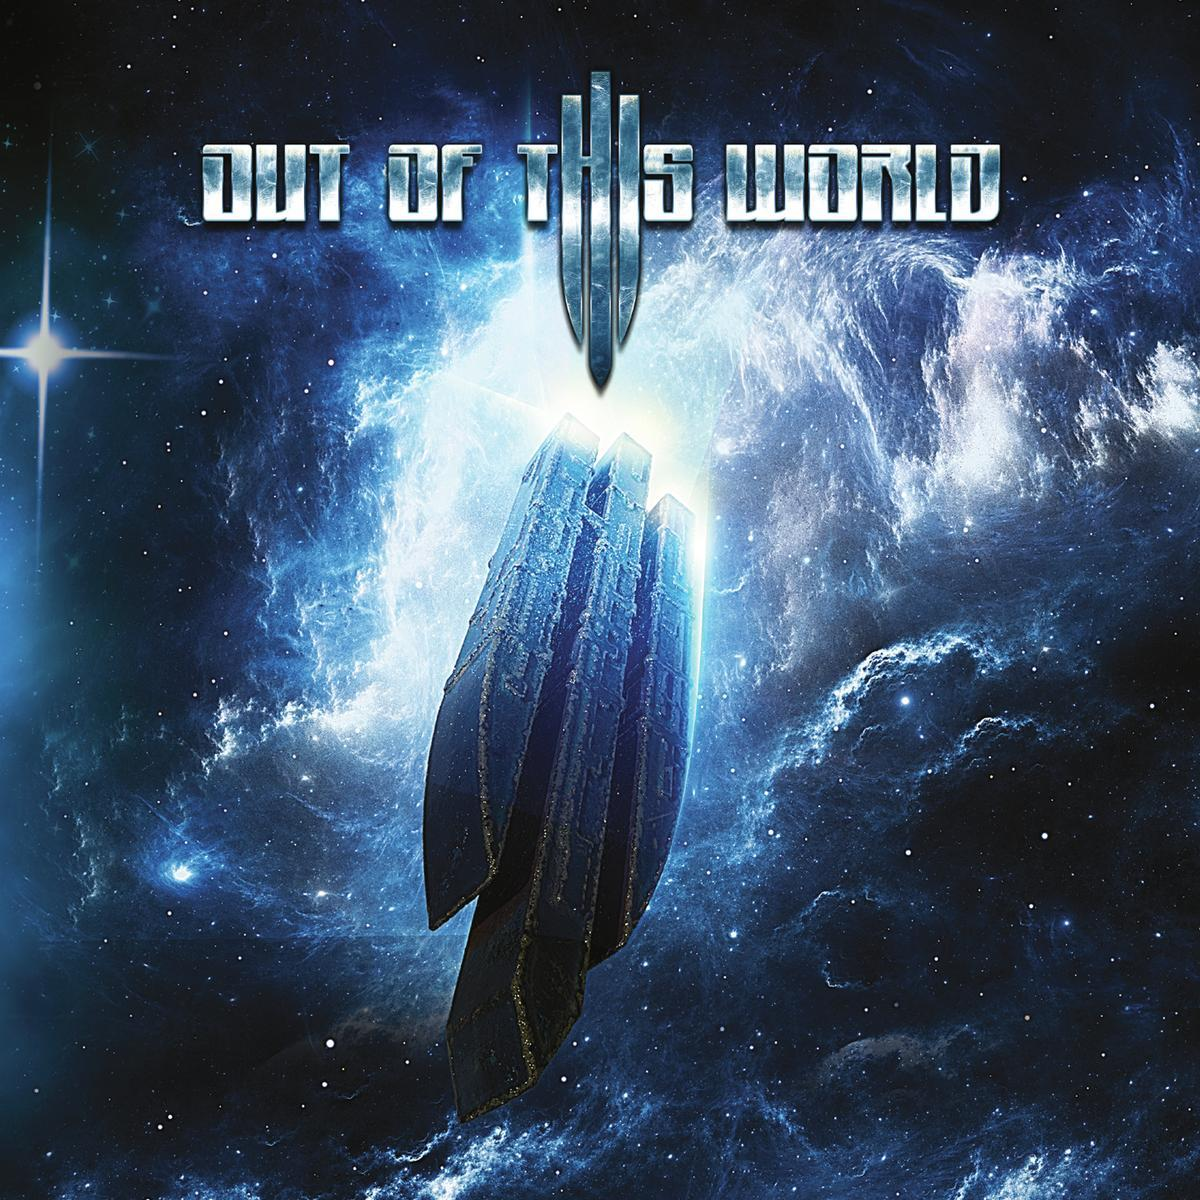 OF Out World WORLD OUT - THIS - (Vinyl) This Of